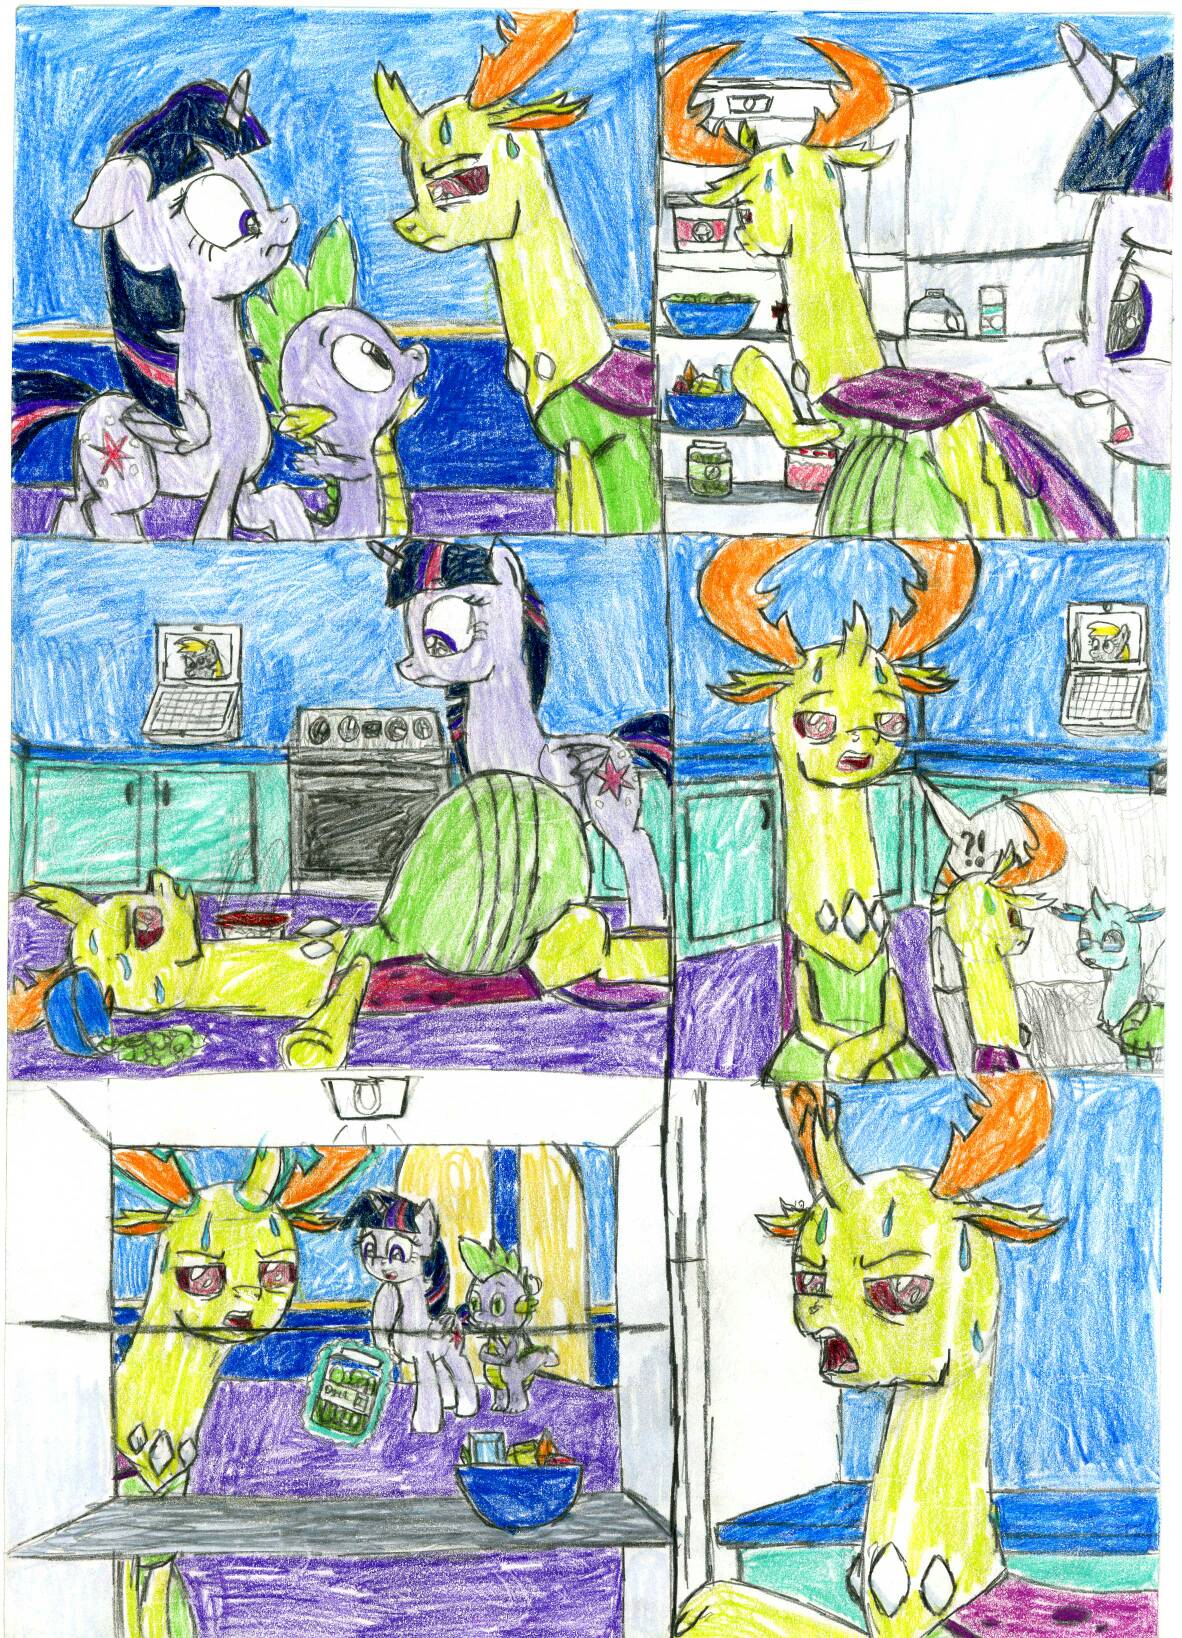 Thorax is Pregnant 2/2 by someguy458 on DeviantArt